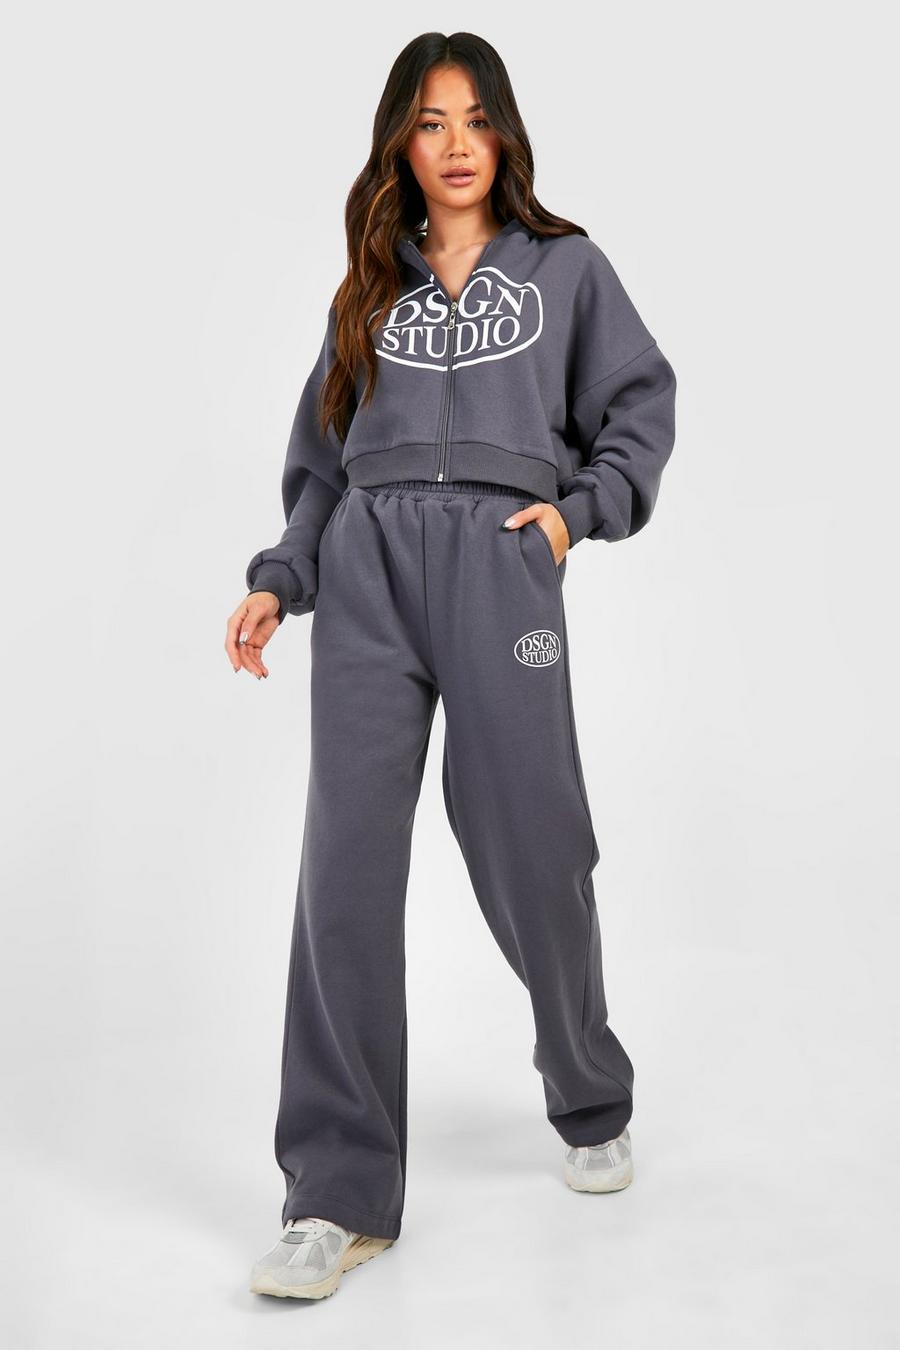 Charcoal Dsgn Studio Slogan Zip Through Hooded Straight Leg Tracksuit image number 1